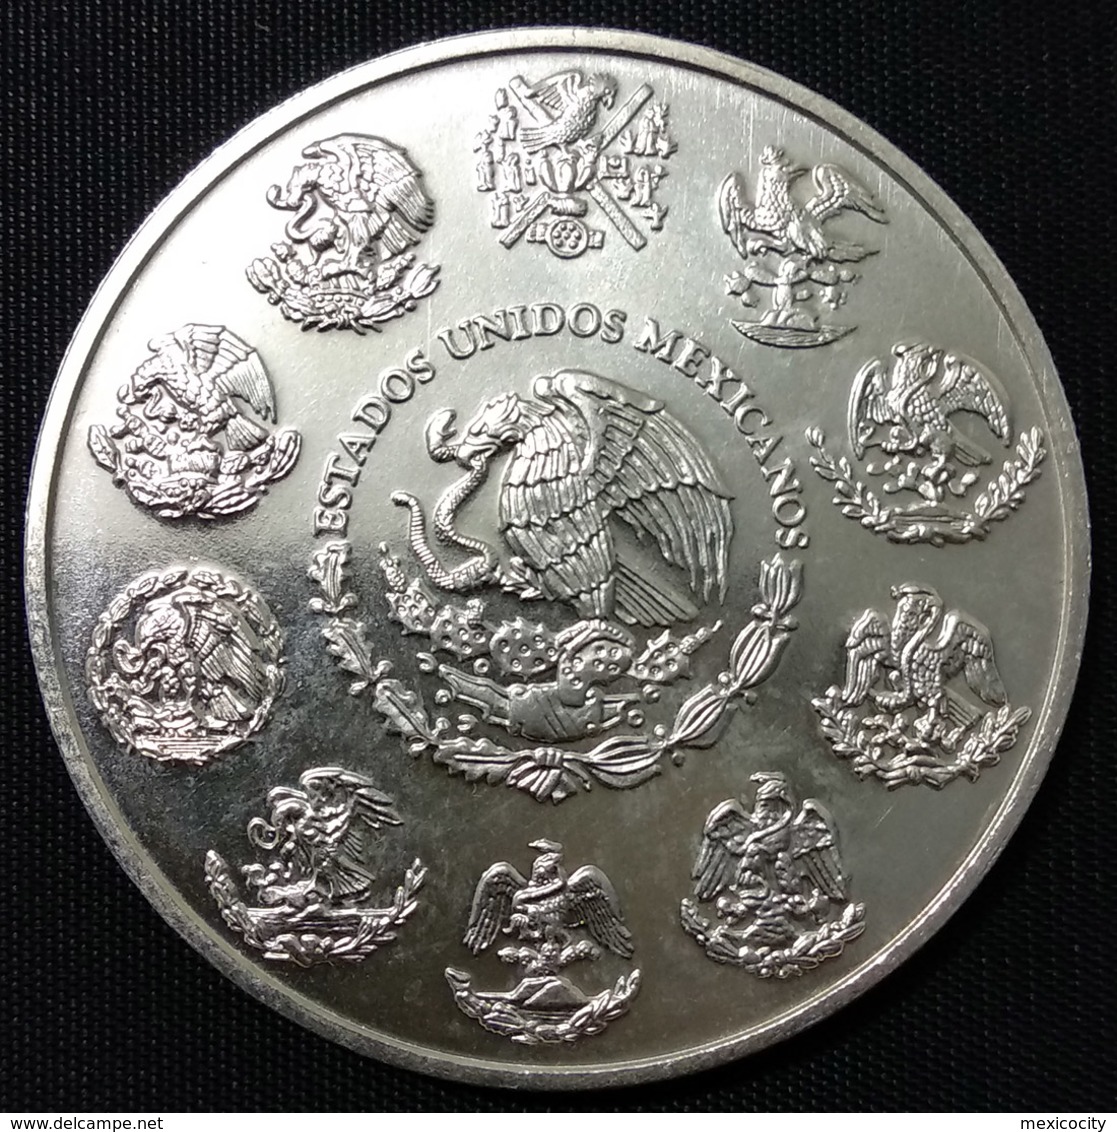 MEXICO 2003 LIBERTAD 1 Ounce Piece, .999 Silver, See Images For Condition, Scarce, Bargain Priced - Mexico